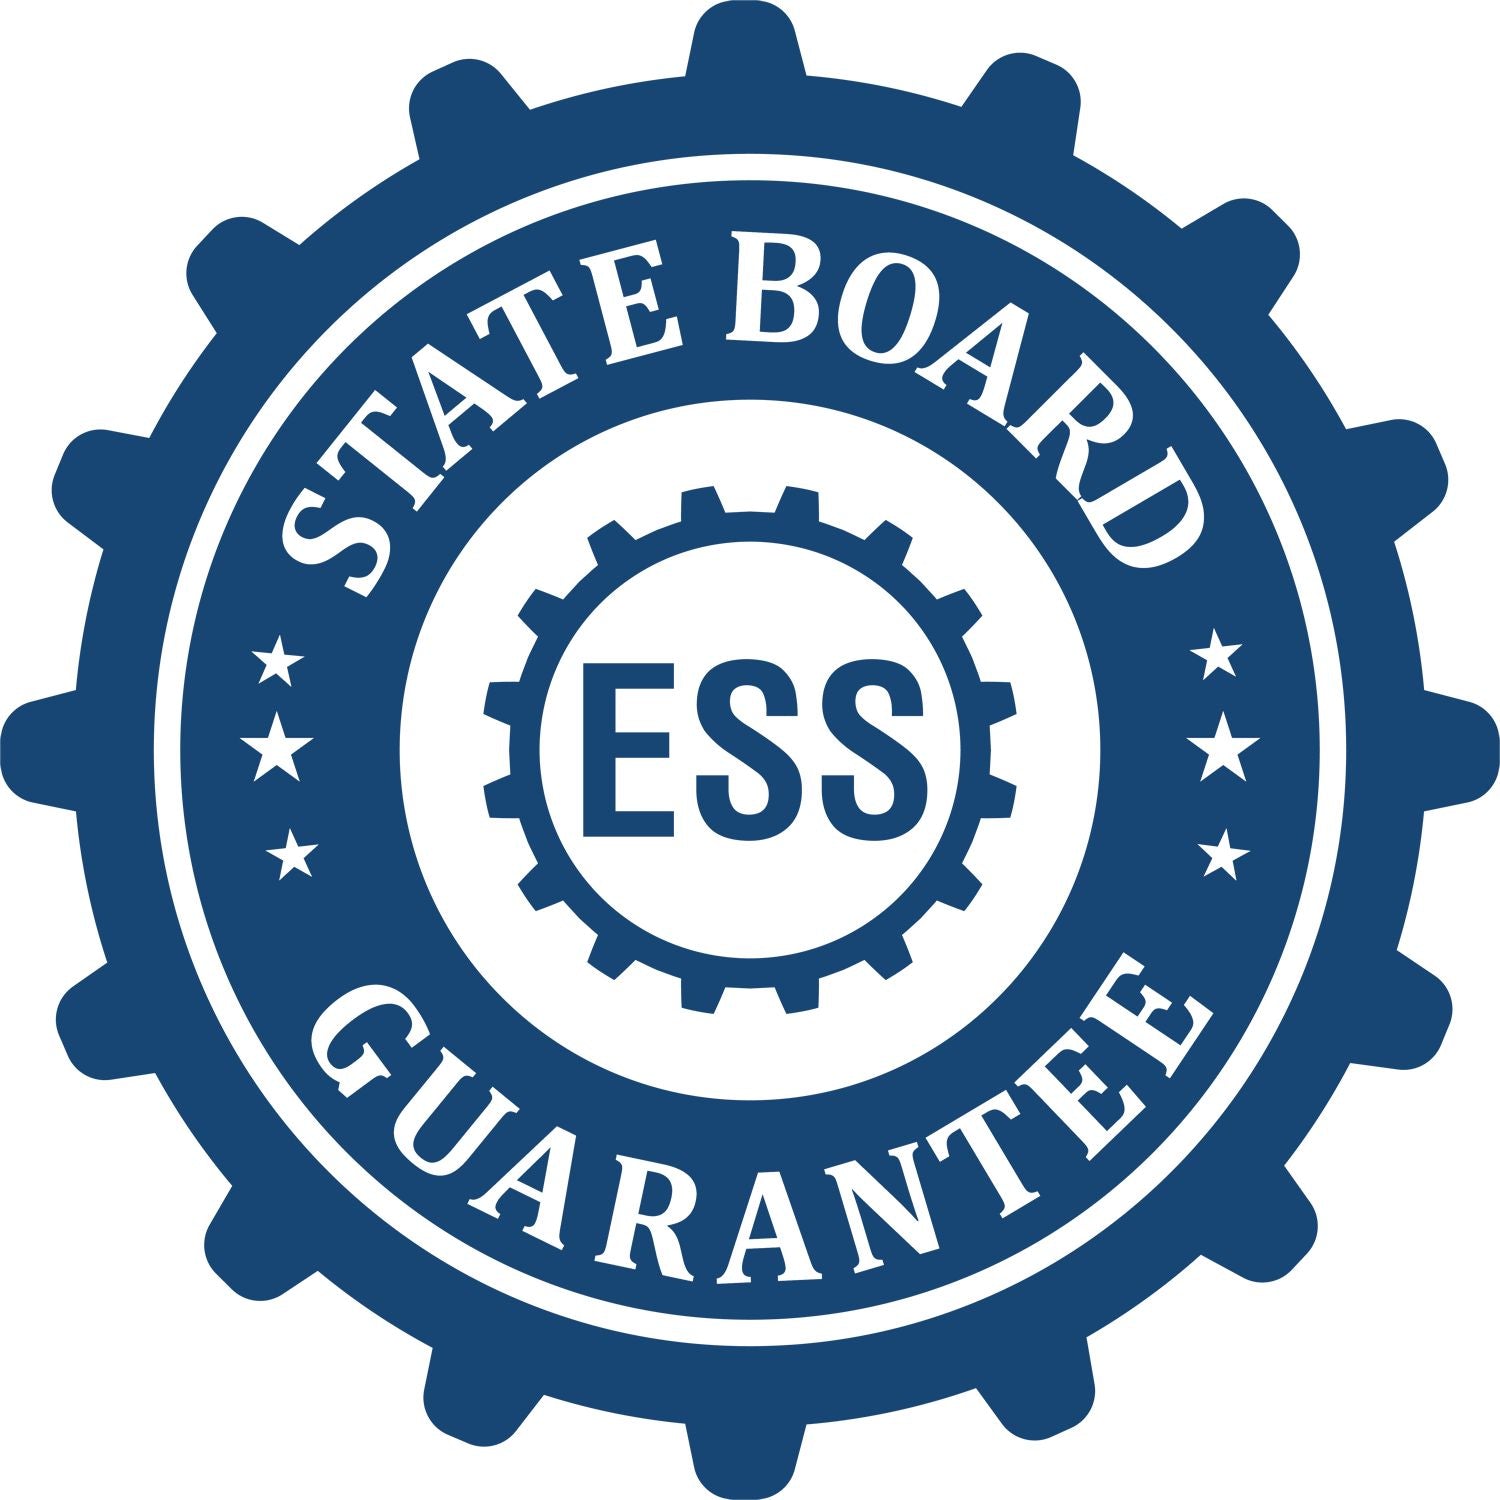 An emblem in a gear shape illustrating a state board guarantee for the Hybrid Iowa Land Surveyor Seal